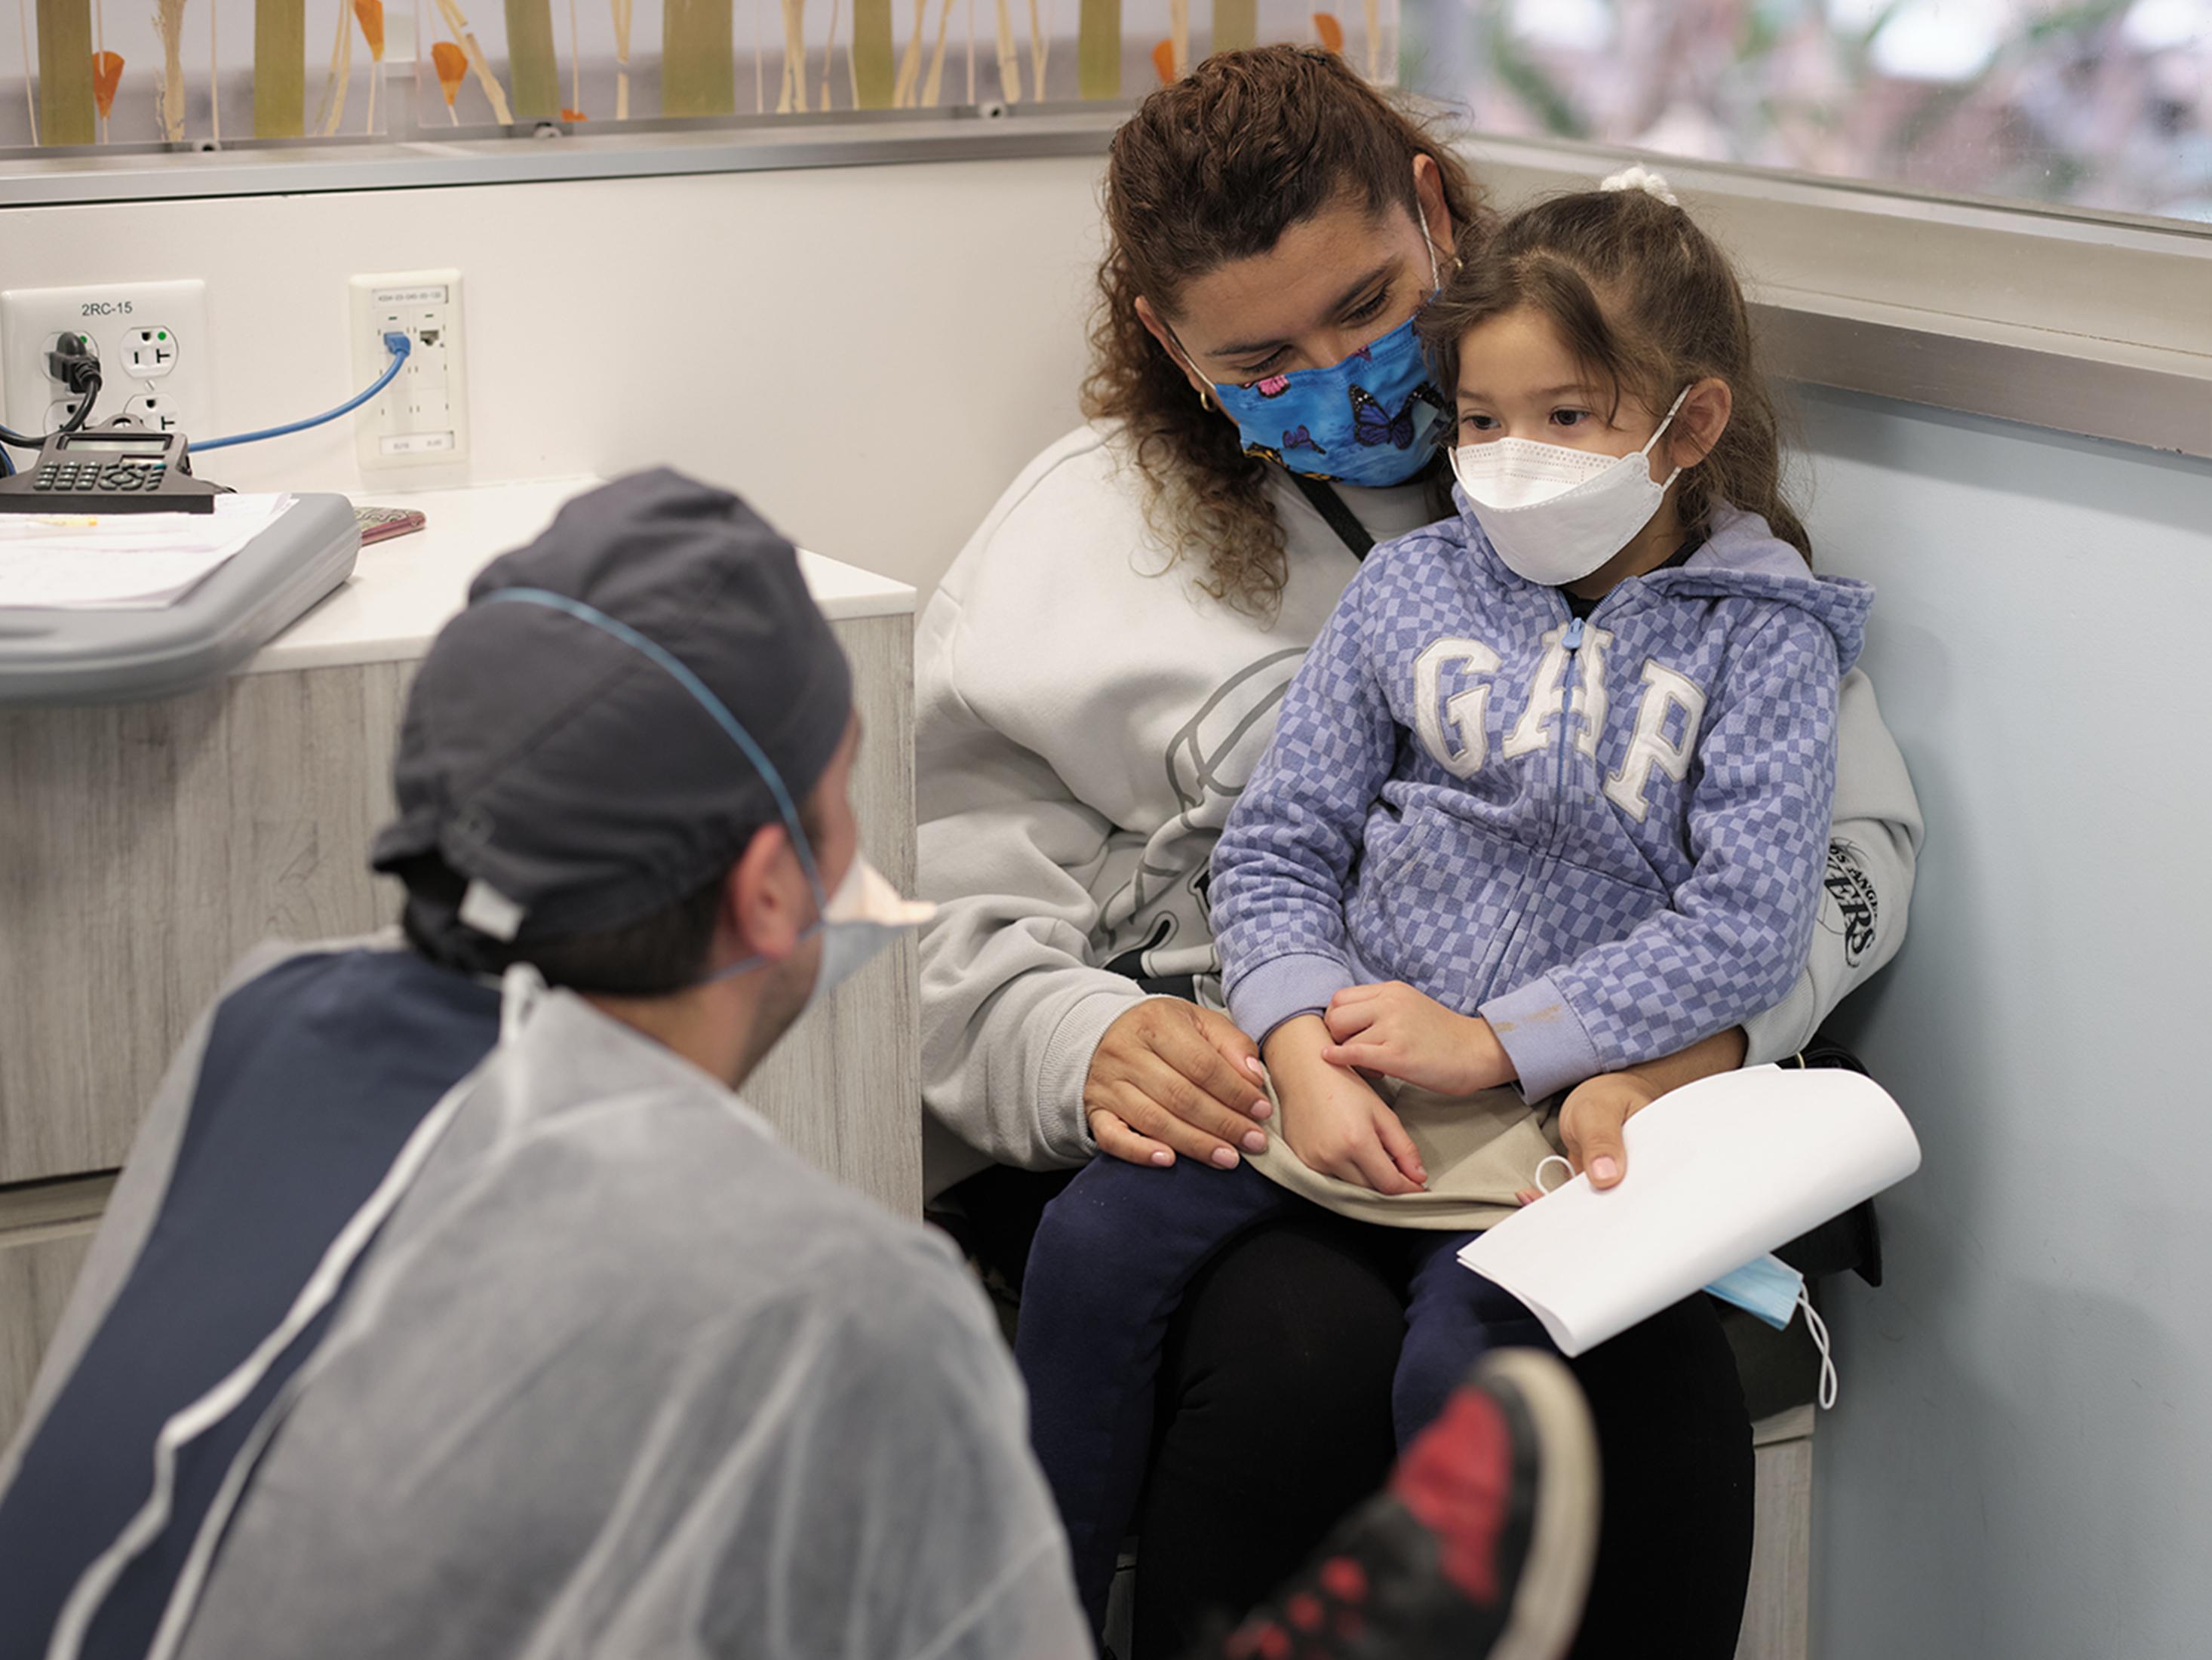 A pediatric resident talking to a patient.